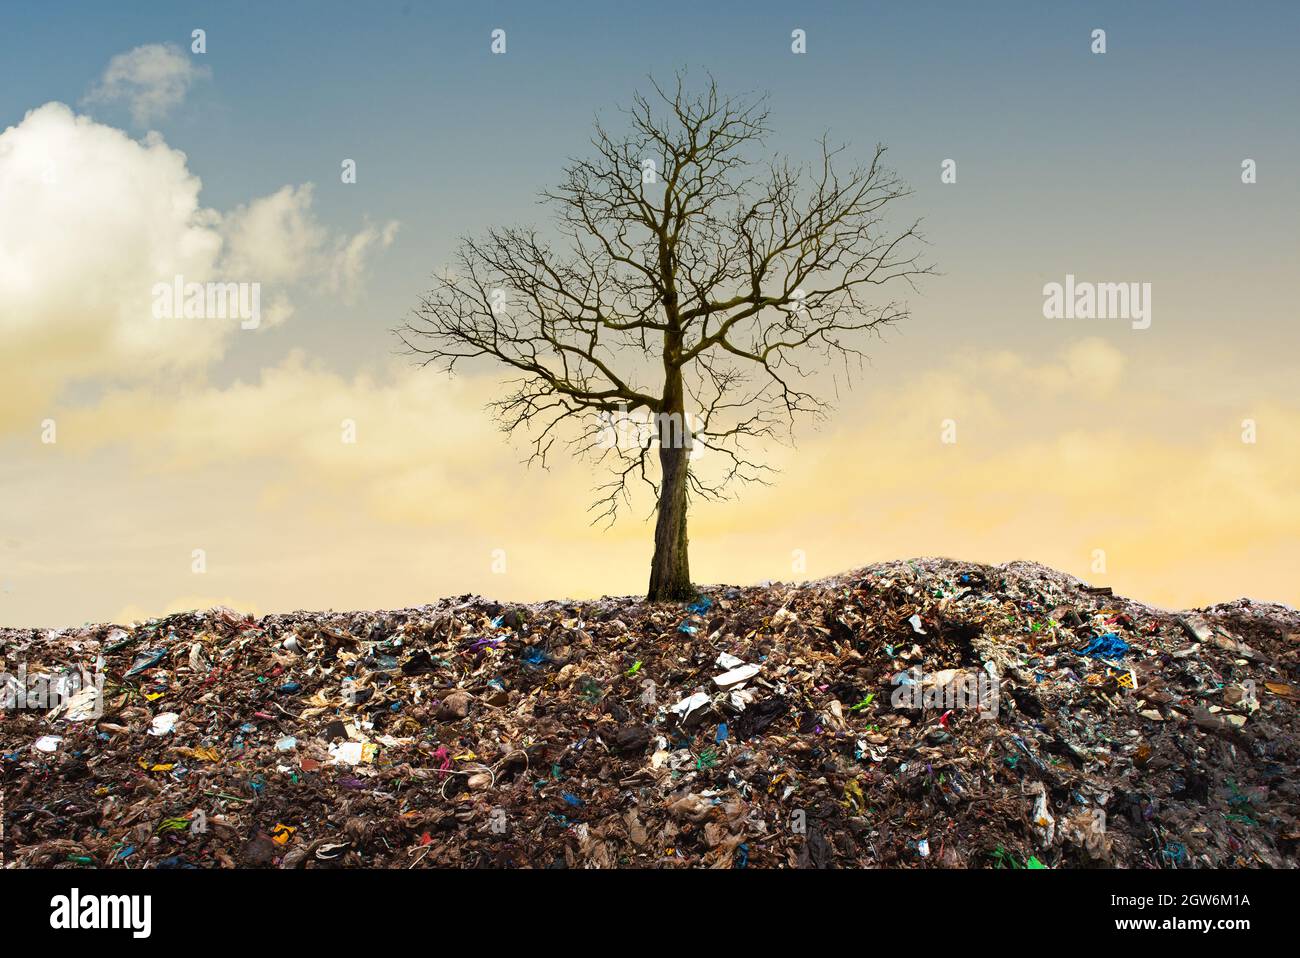 Dead tree shaped like qrcore in the garbage pile. Stock Photo